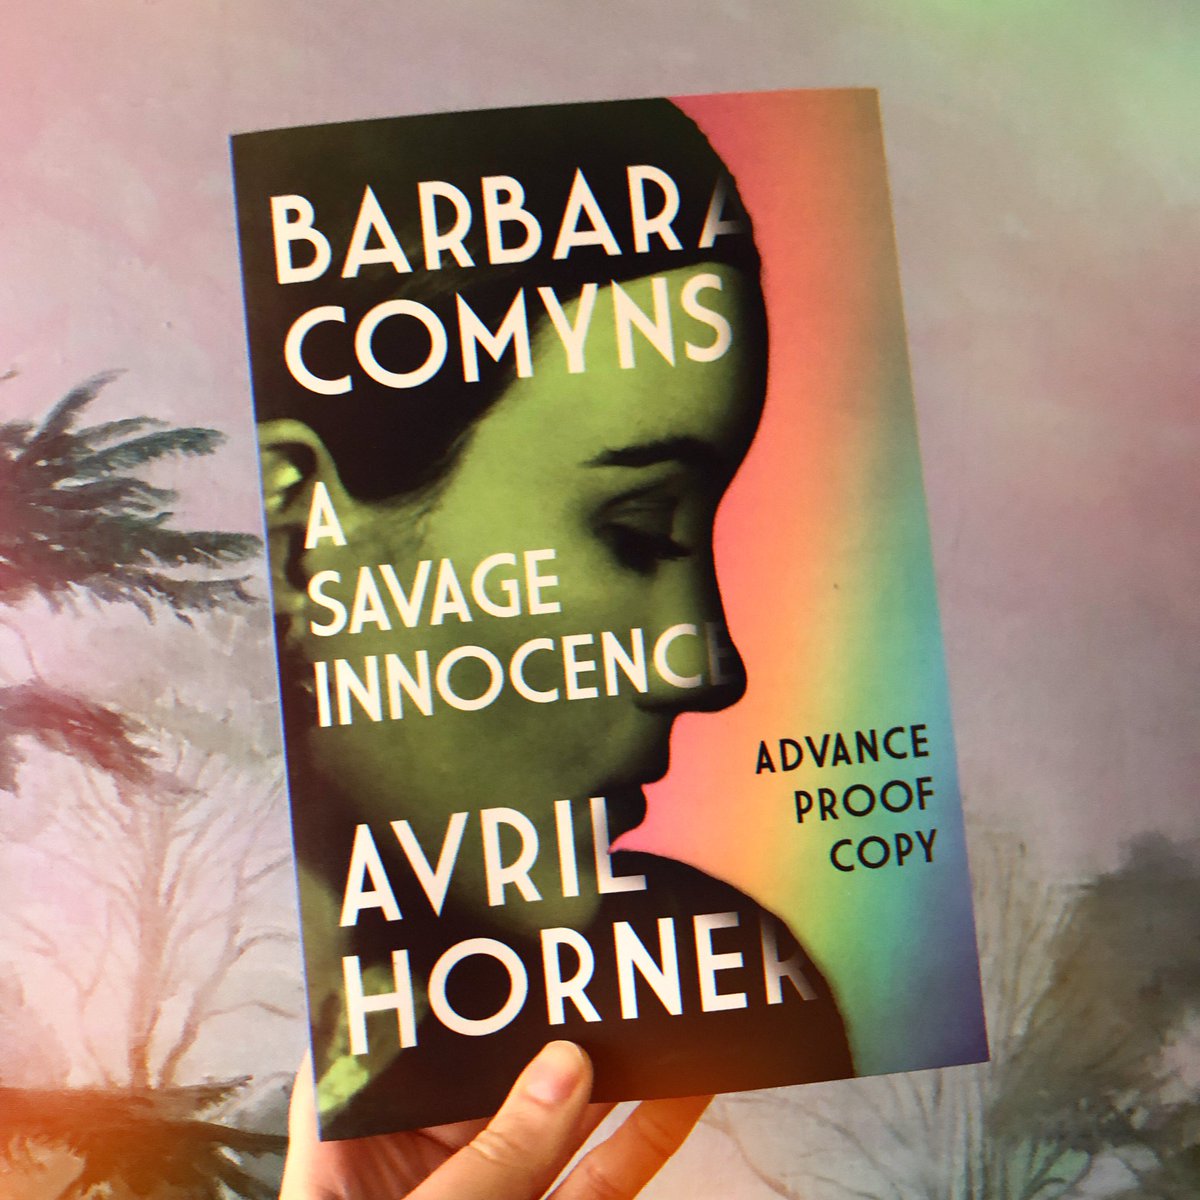 Happy pub day to @avrilhorner1, whose biography of Barbara Comyns is out today from @ManchesterUP. It’s the eye-opening story of a writer whose life was every bit as adventurous & unconventional as anything she wrote about in her strange, surreal, brilliant & original novels.